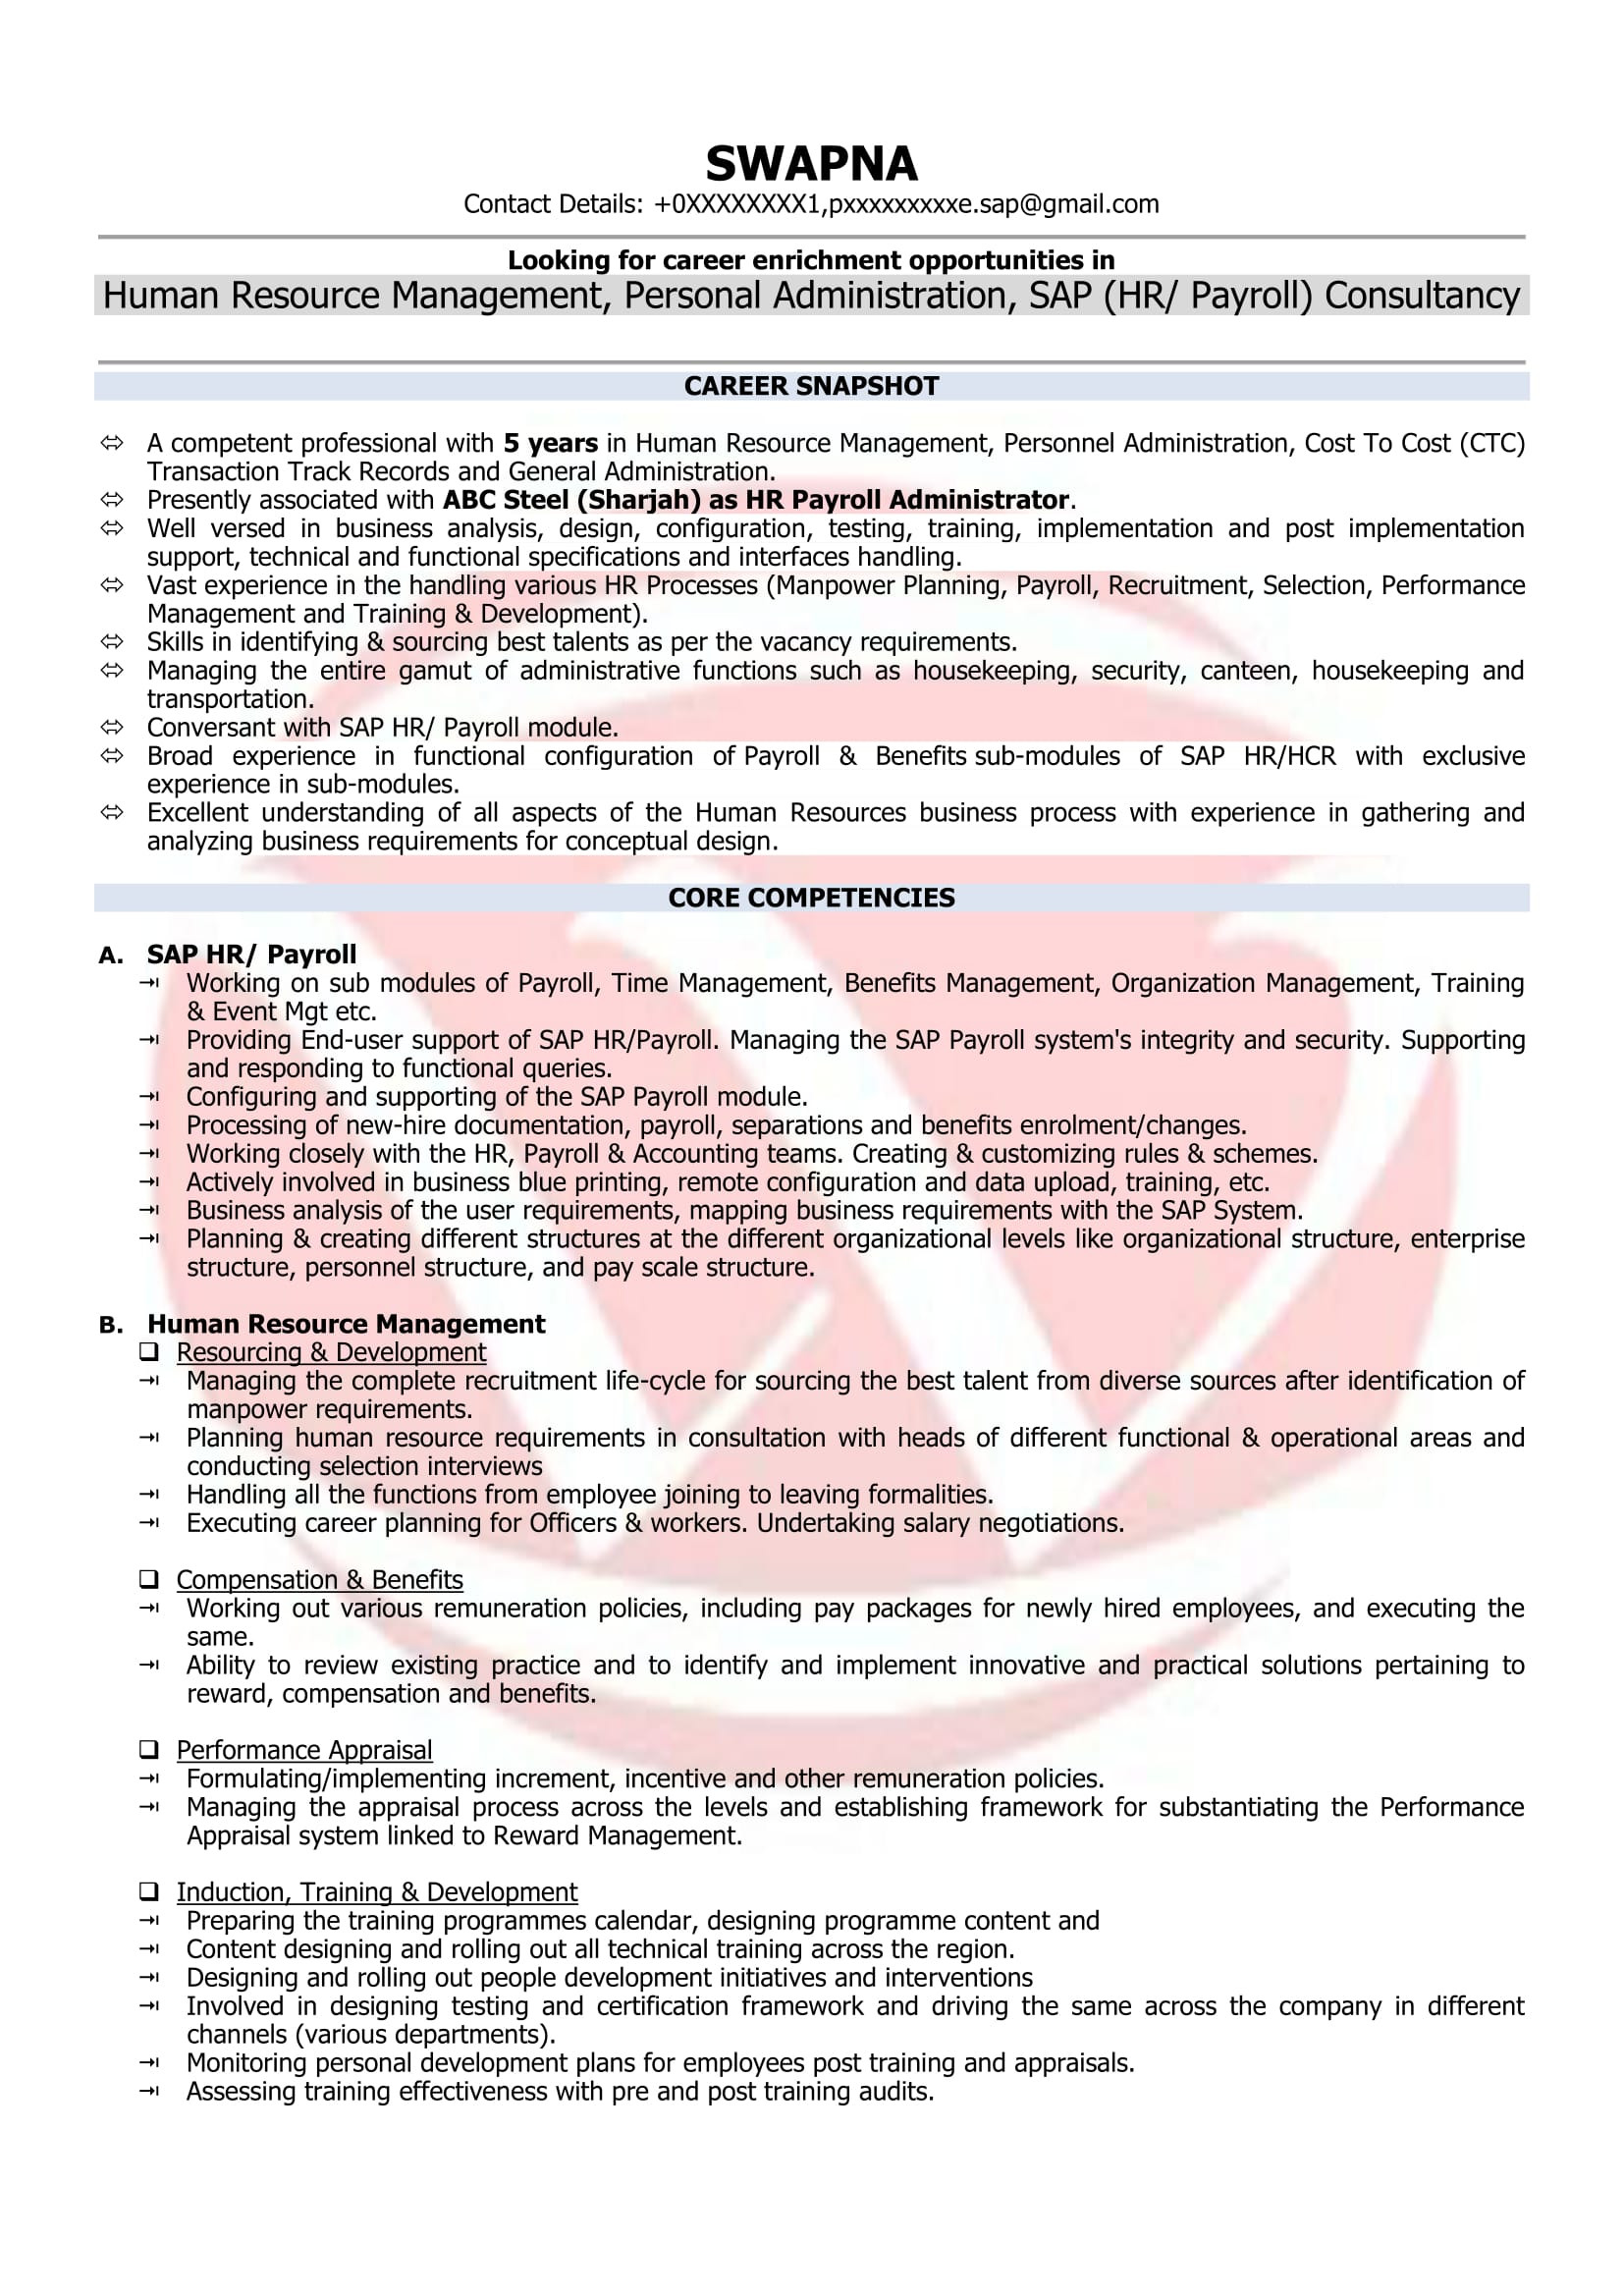 Hr Training and Development Resume Sample Hr Executive Sample Resumes, Download Resume format Templates!